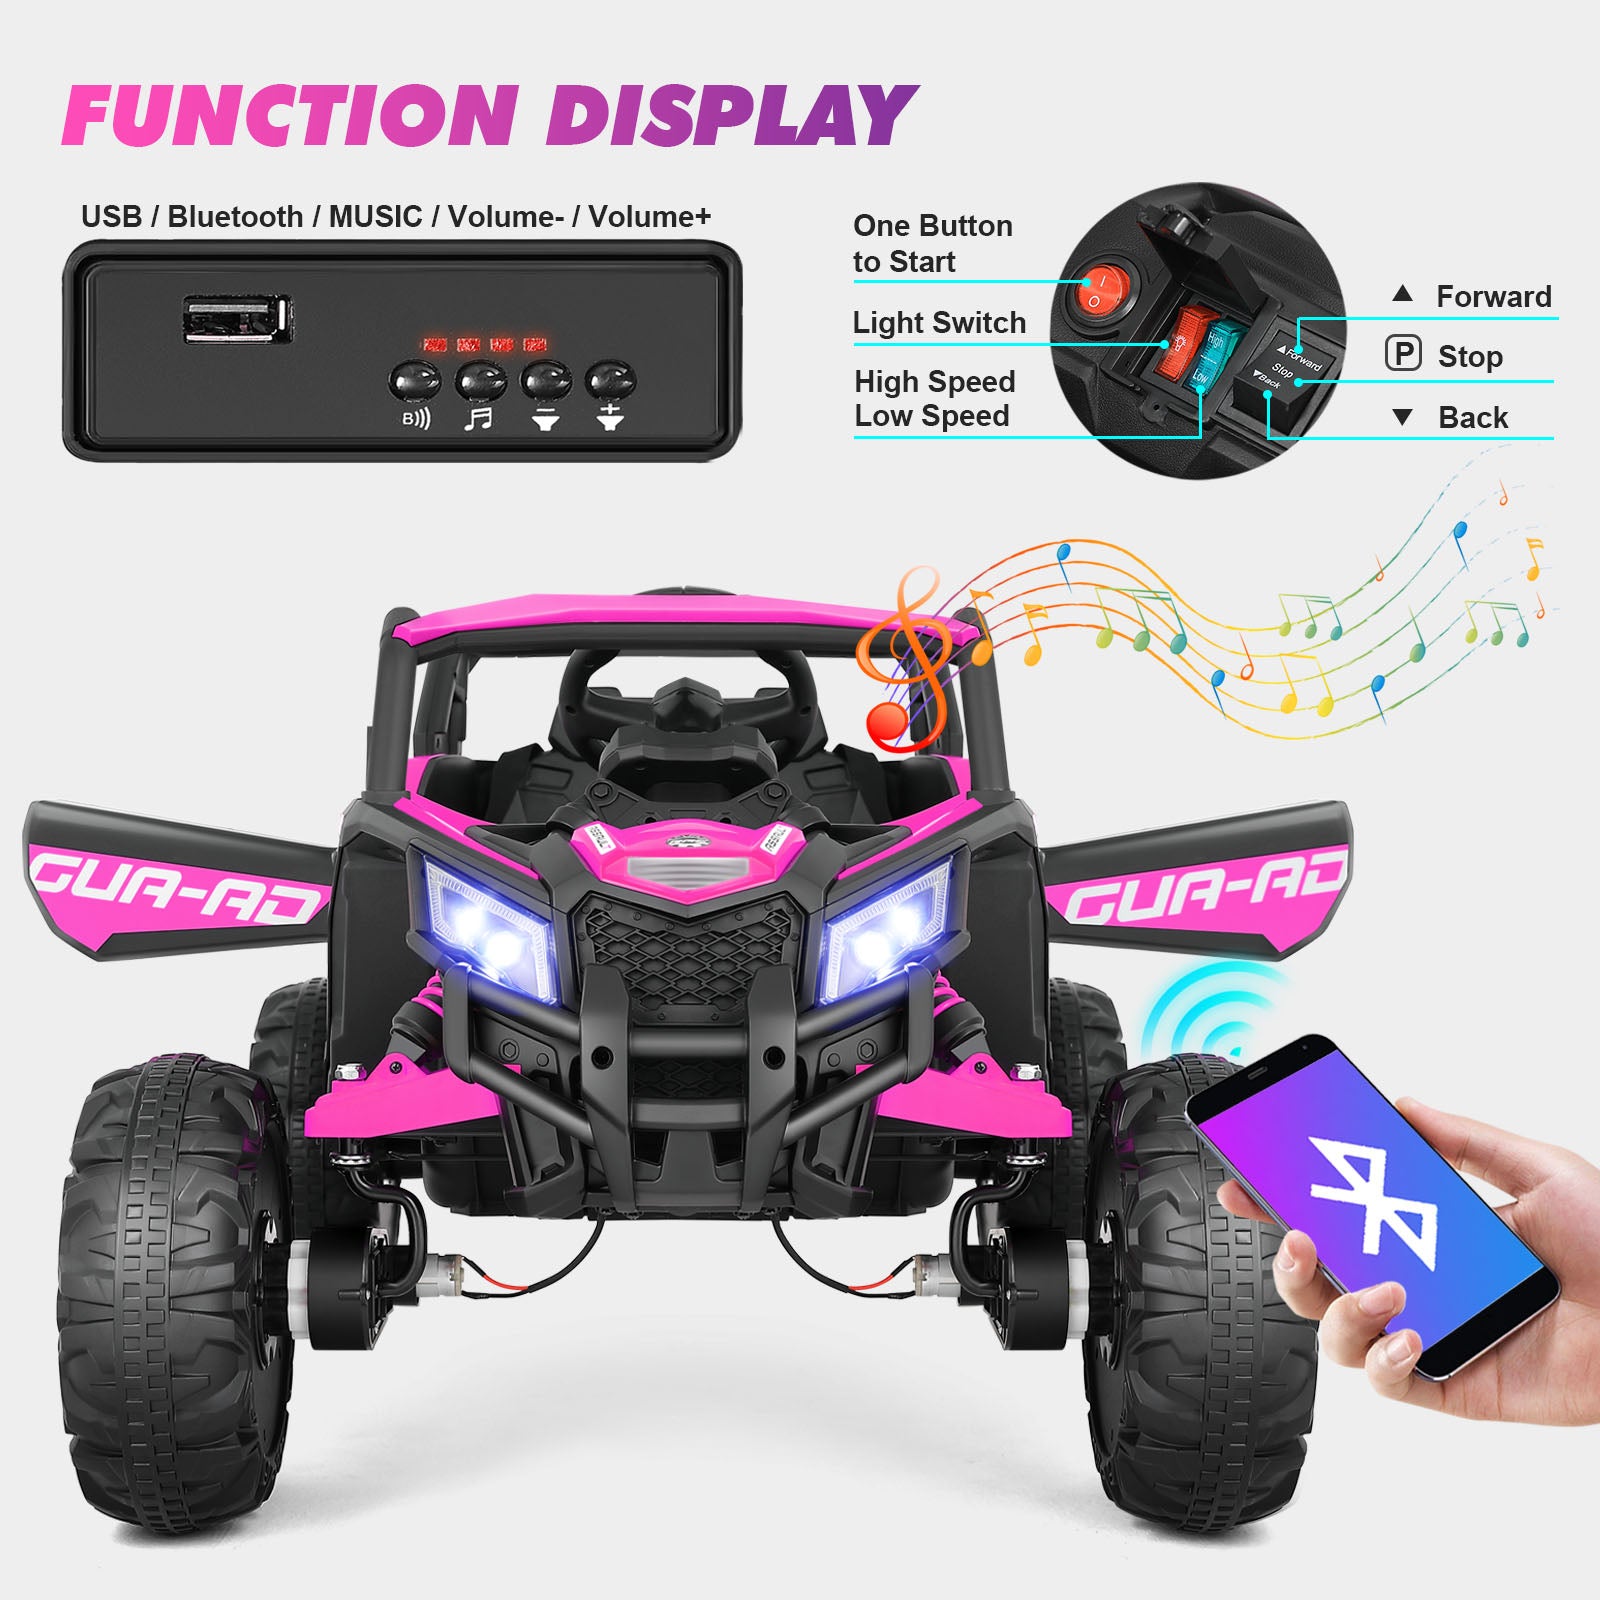 Electric Off-Road UTV for Kids, 4X4 Electric Vehicle Ride on Car